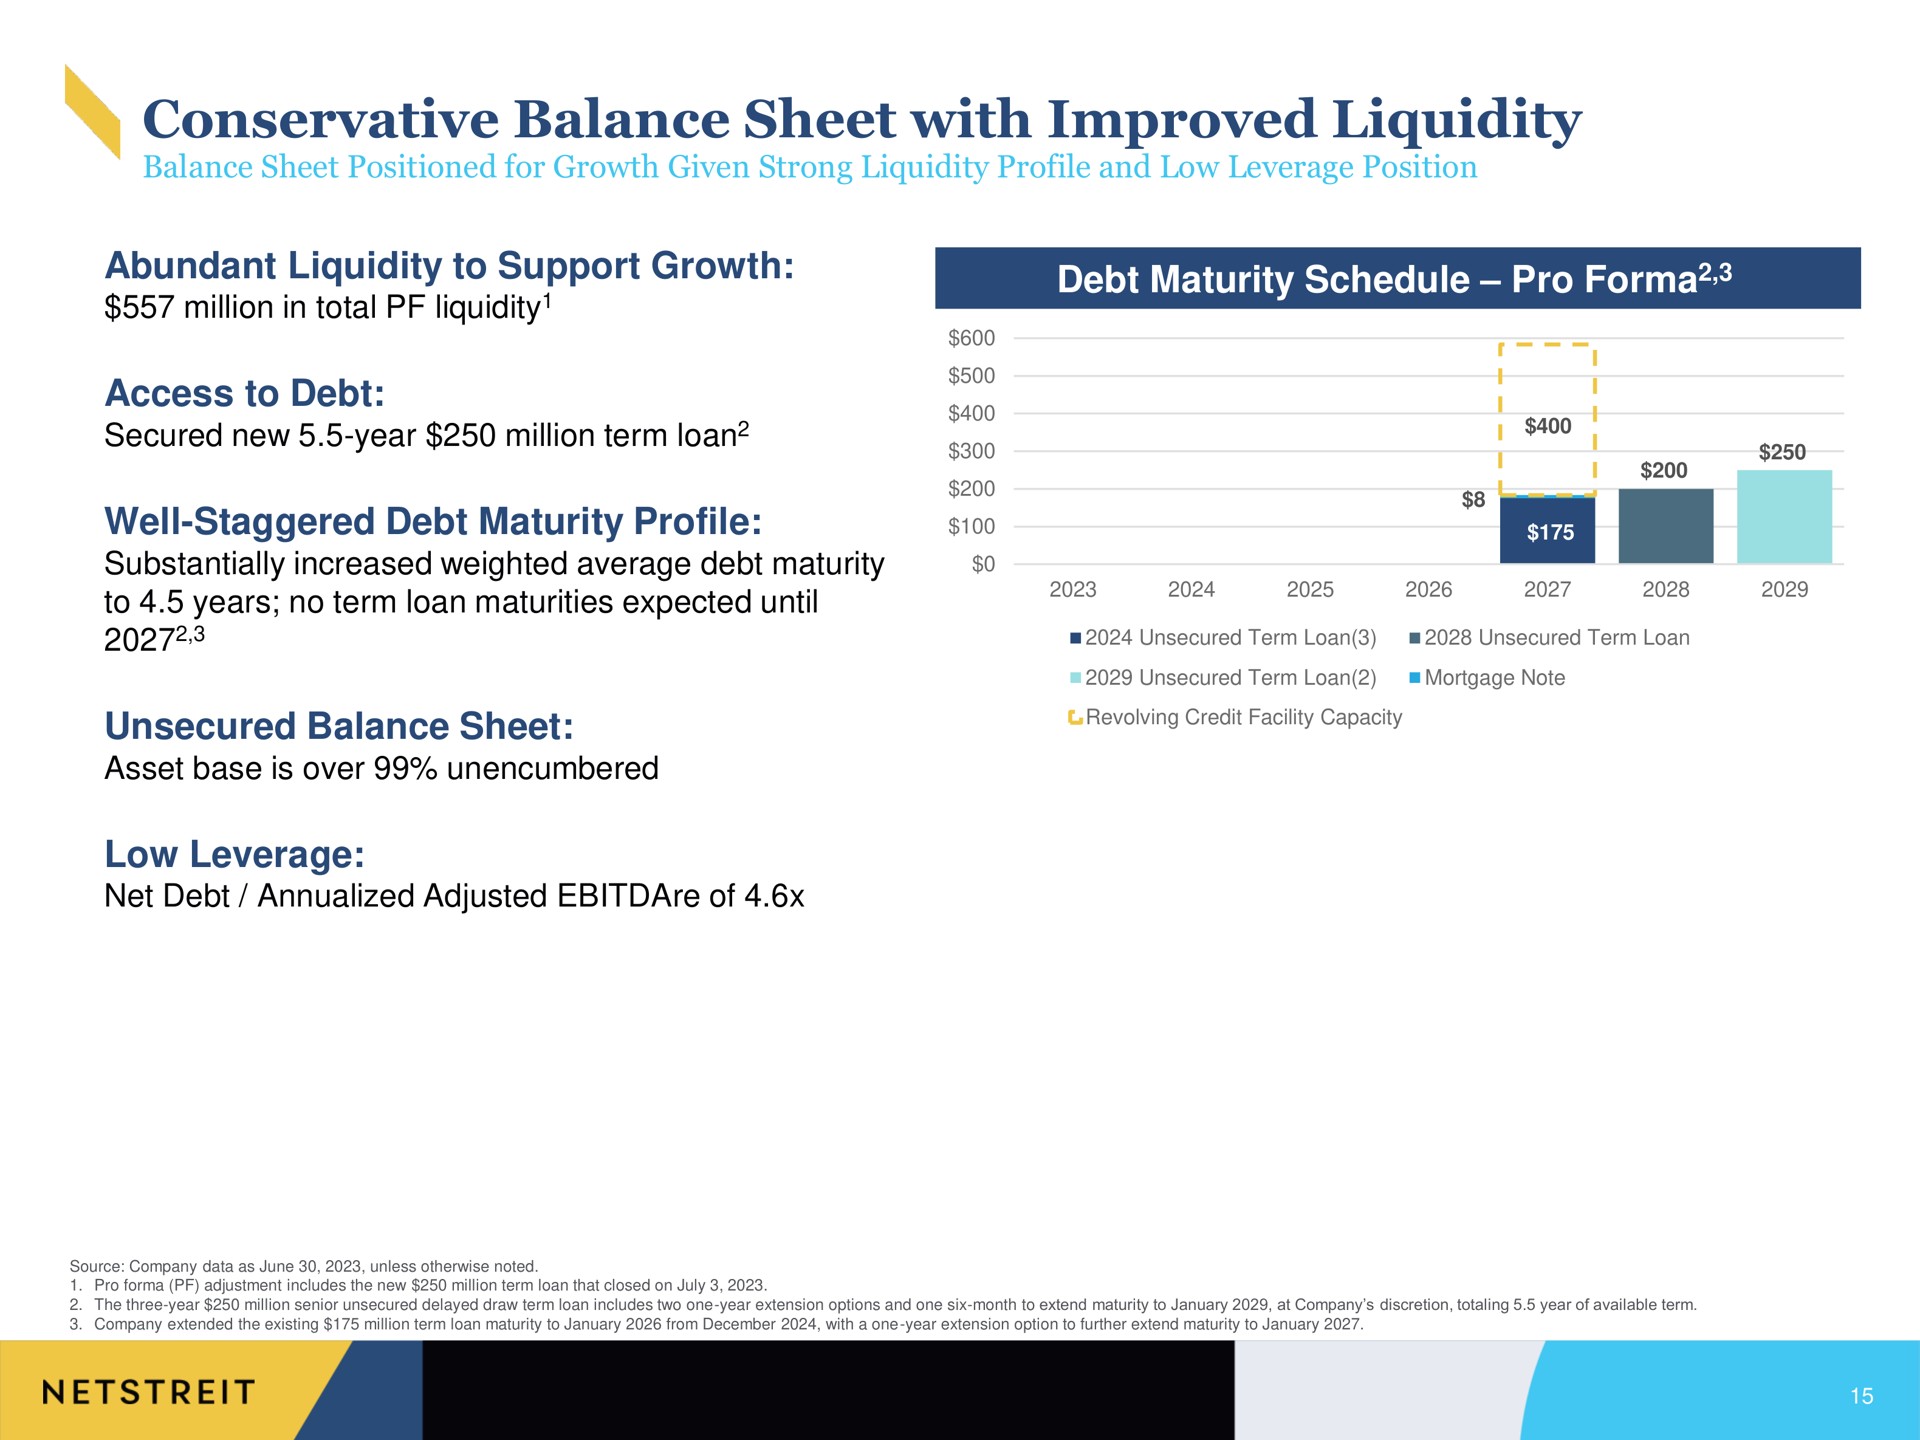 conservative balance sheet with improved liquidity abundant liquidity to support growth access to debt well staggered debt maturity profile unsecured balance sheet low leverage debt maturity schedule pro i | Netstreit